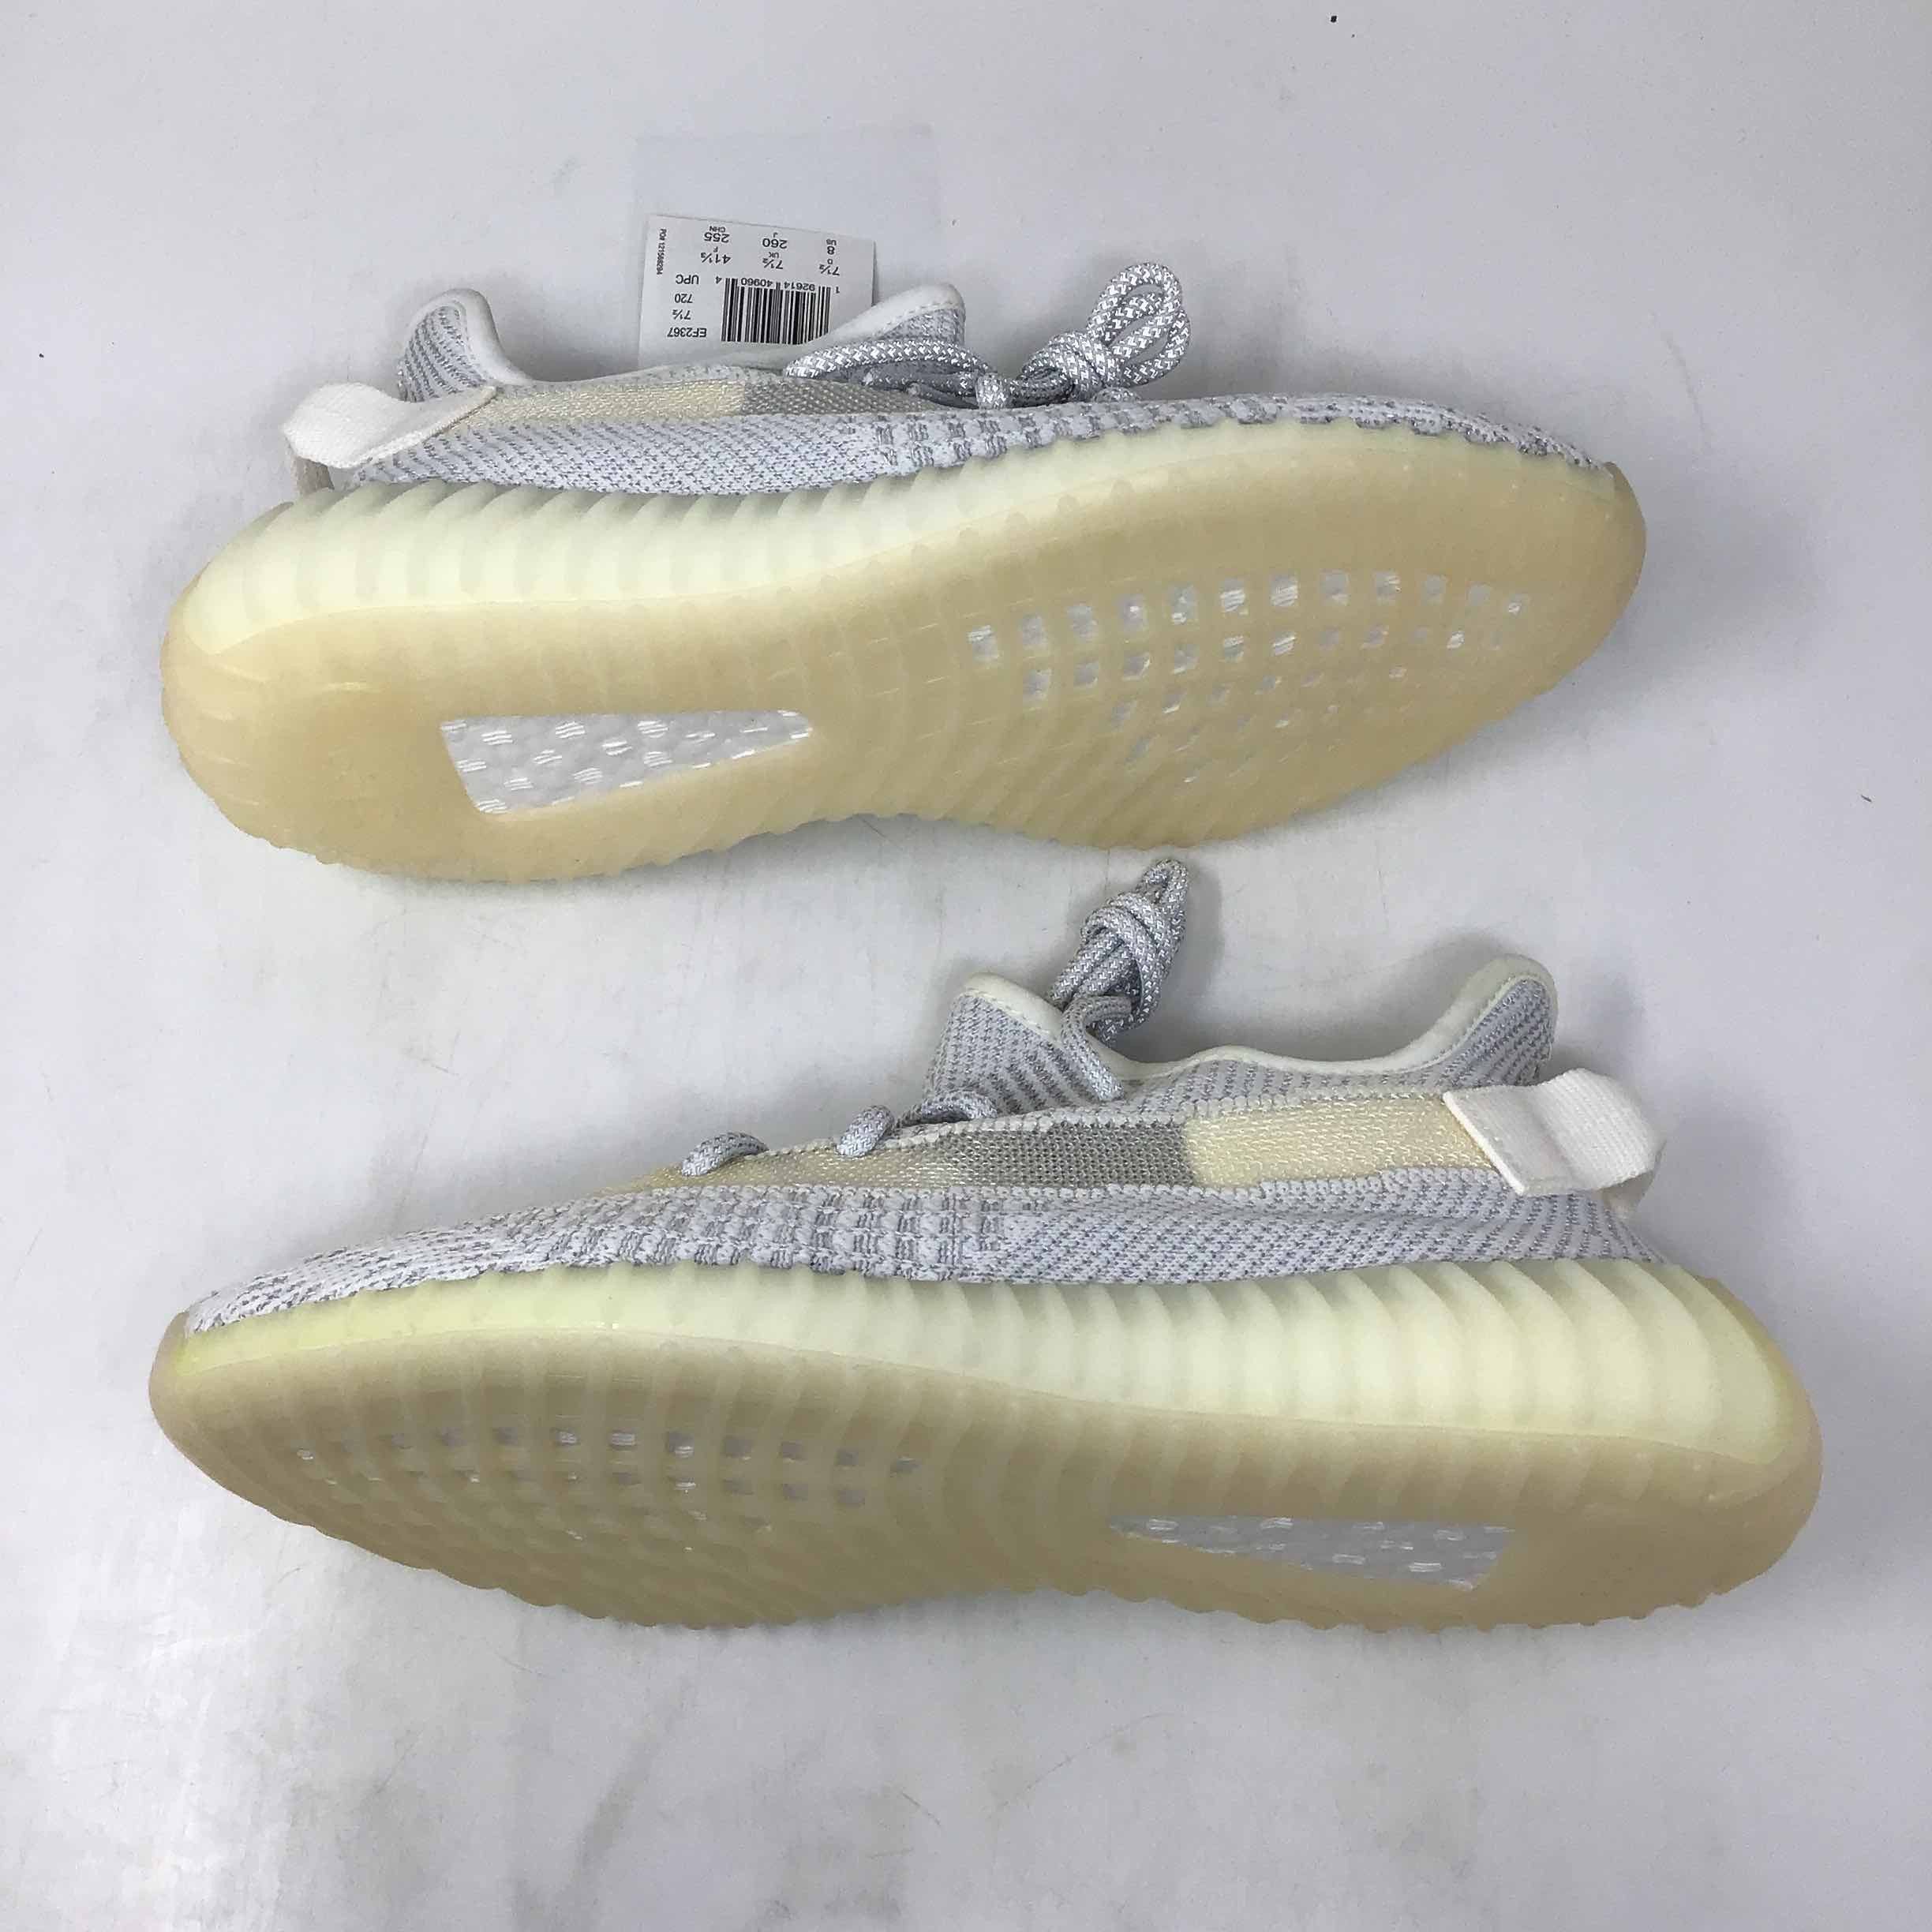 Adidas Yeezy Boost 350 V2 Static Reflective | Grailed